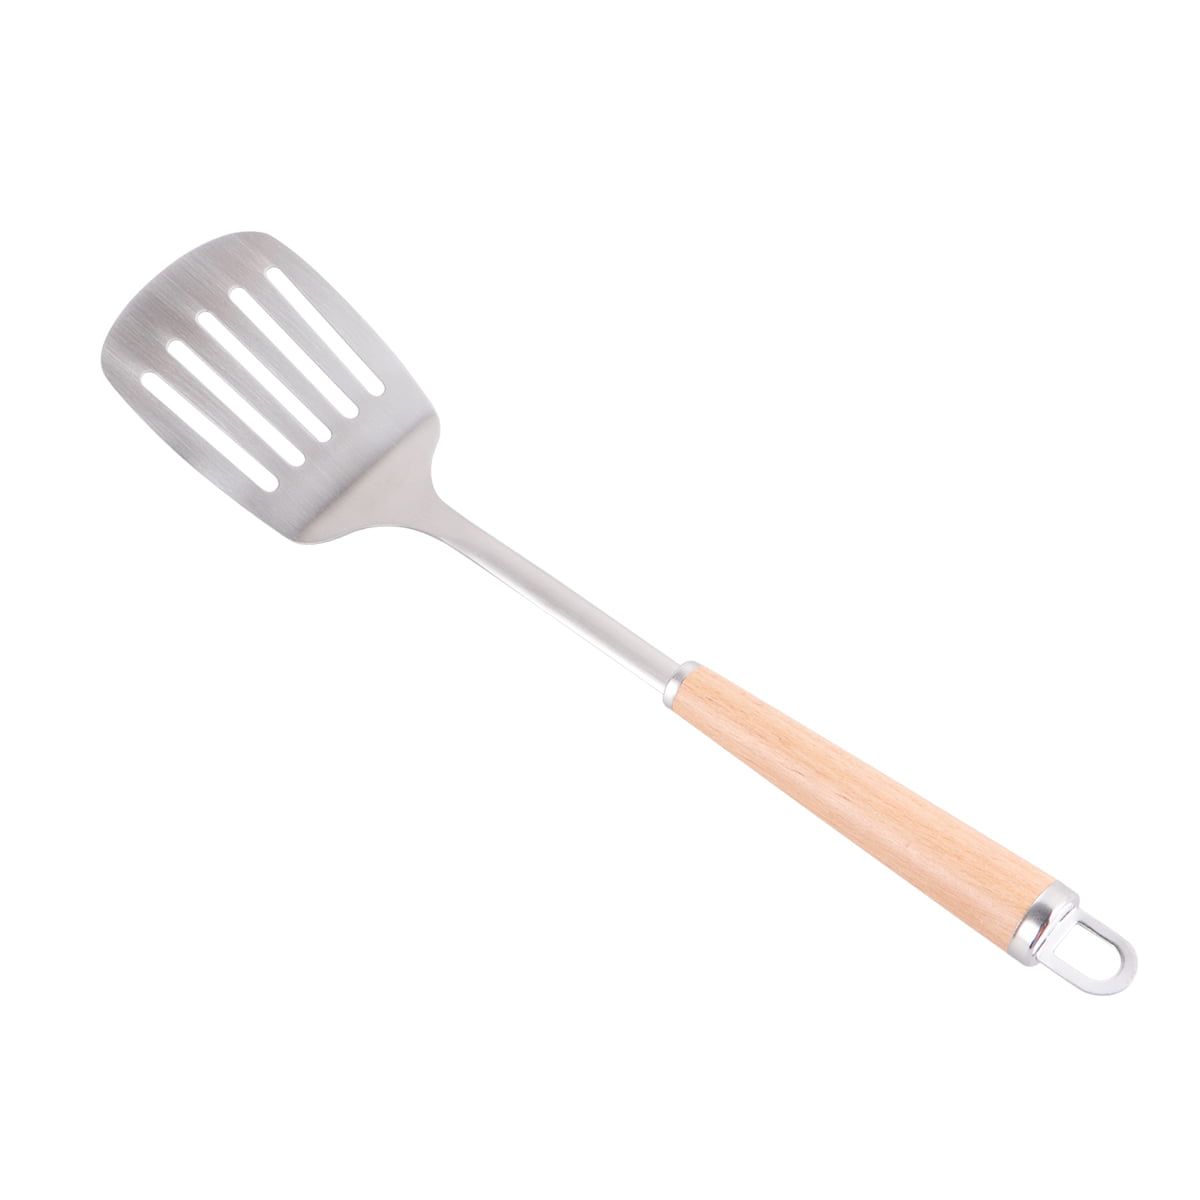 Newness 304 Stainless Steel Slotted Turner Spatula, Professional